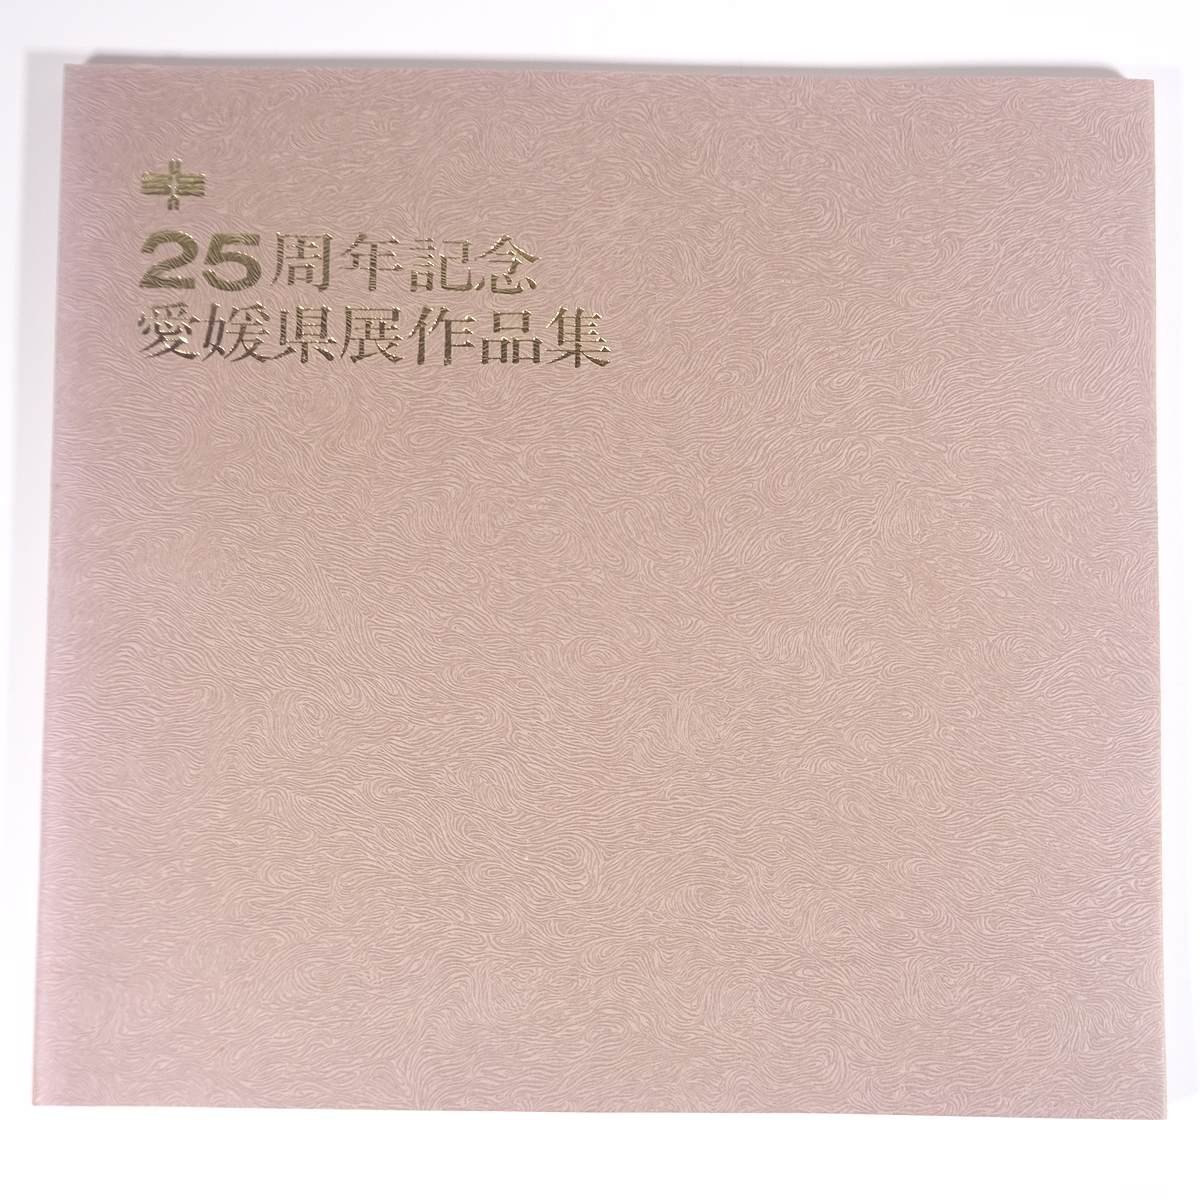 25th Anniversary Prefectural Exhibition Collection Ehime Prefectural Art Association 1976 Large-format book Local book Exhibition Illustrations Catalog Art Fine art Painting Art book Collection of works Crafts Books Others, Painting, Art Book, Collection, Catalog